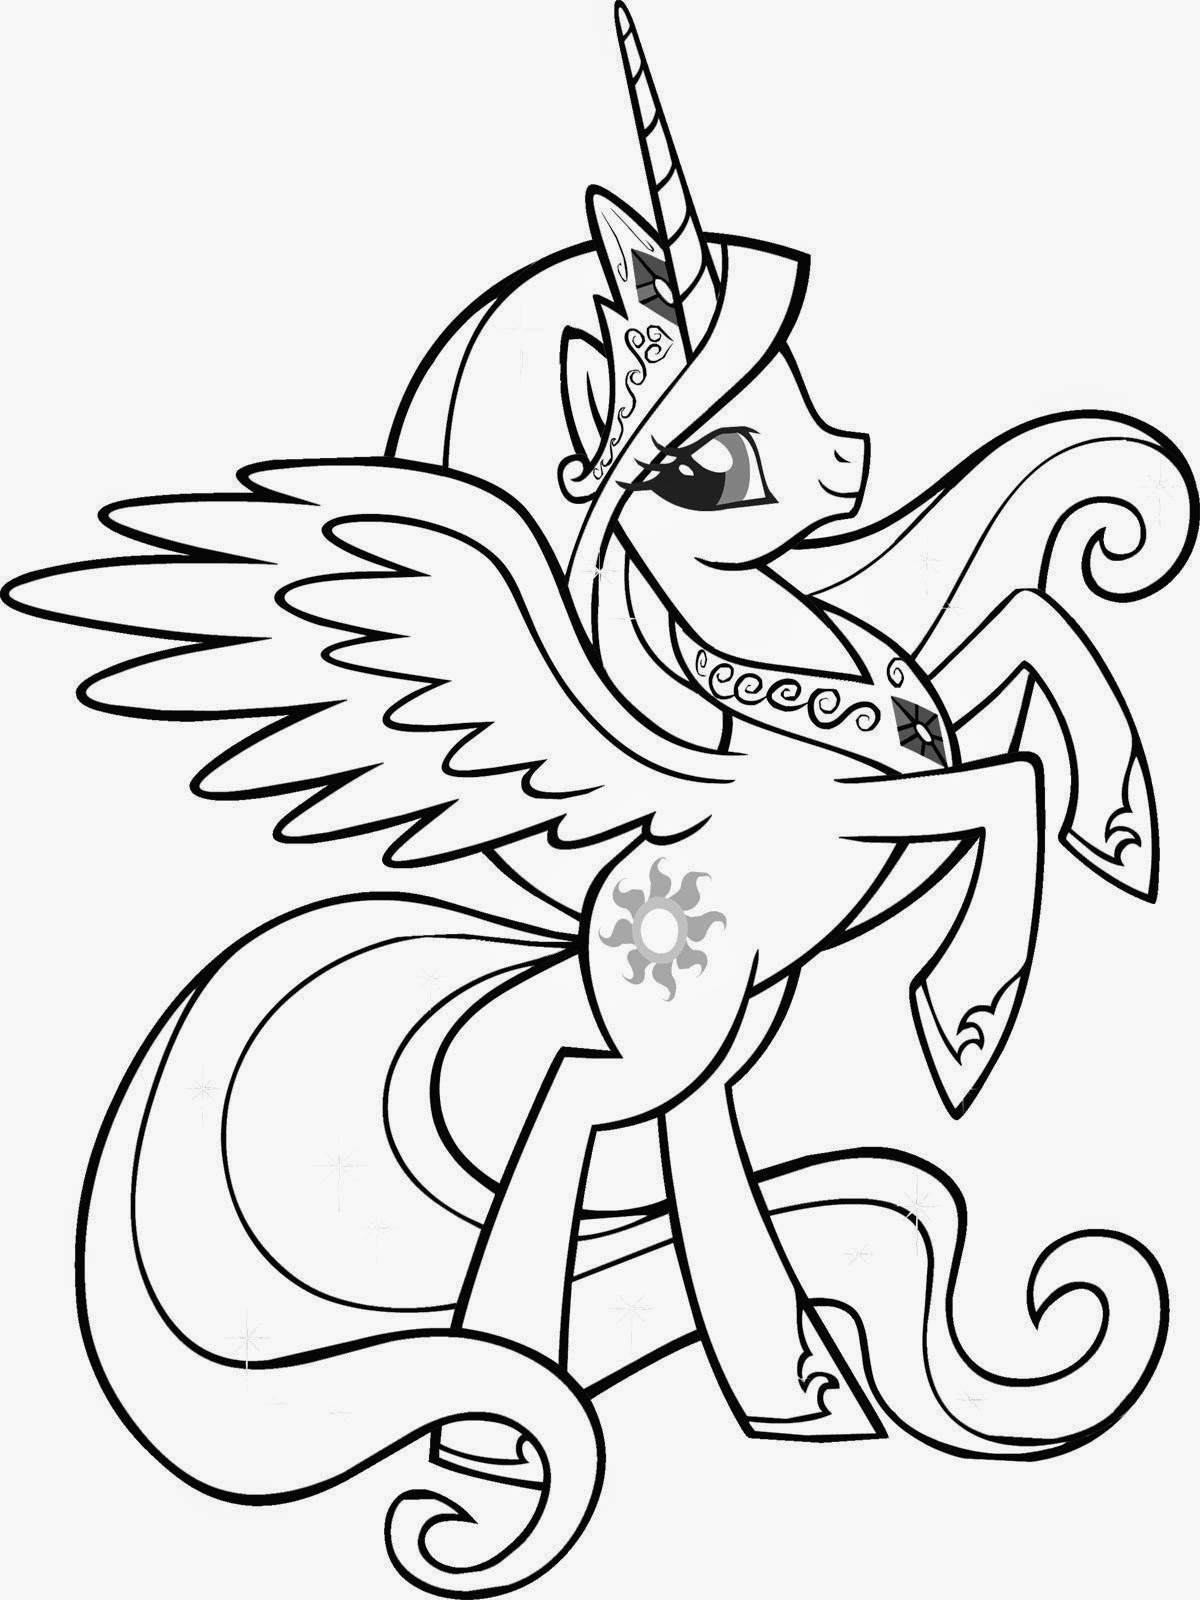  Coloring  Pages  My Little Pony Coloring Pages  Free and 